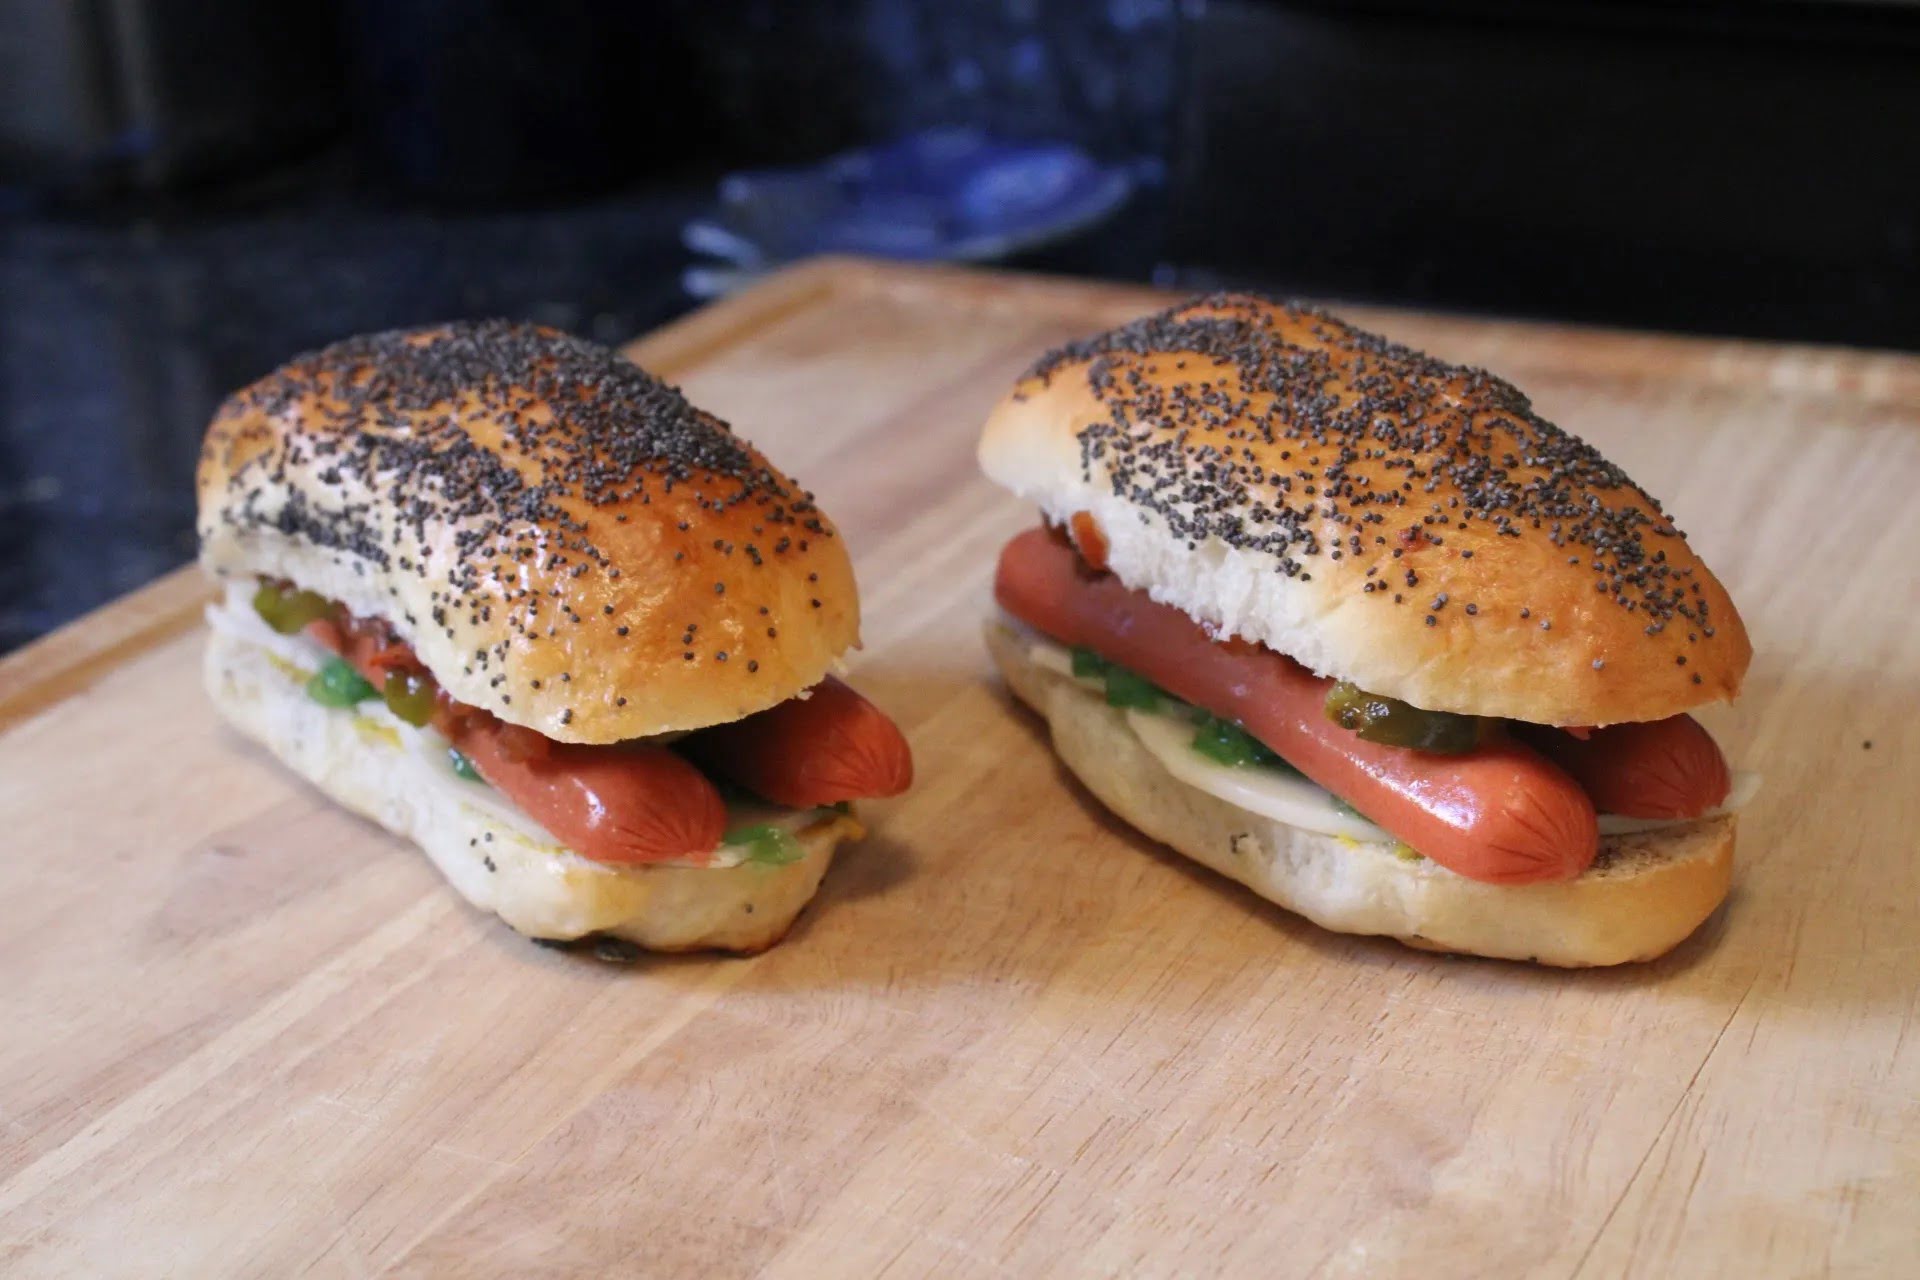 How To Make Poppy Seed Hot Dog Buns